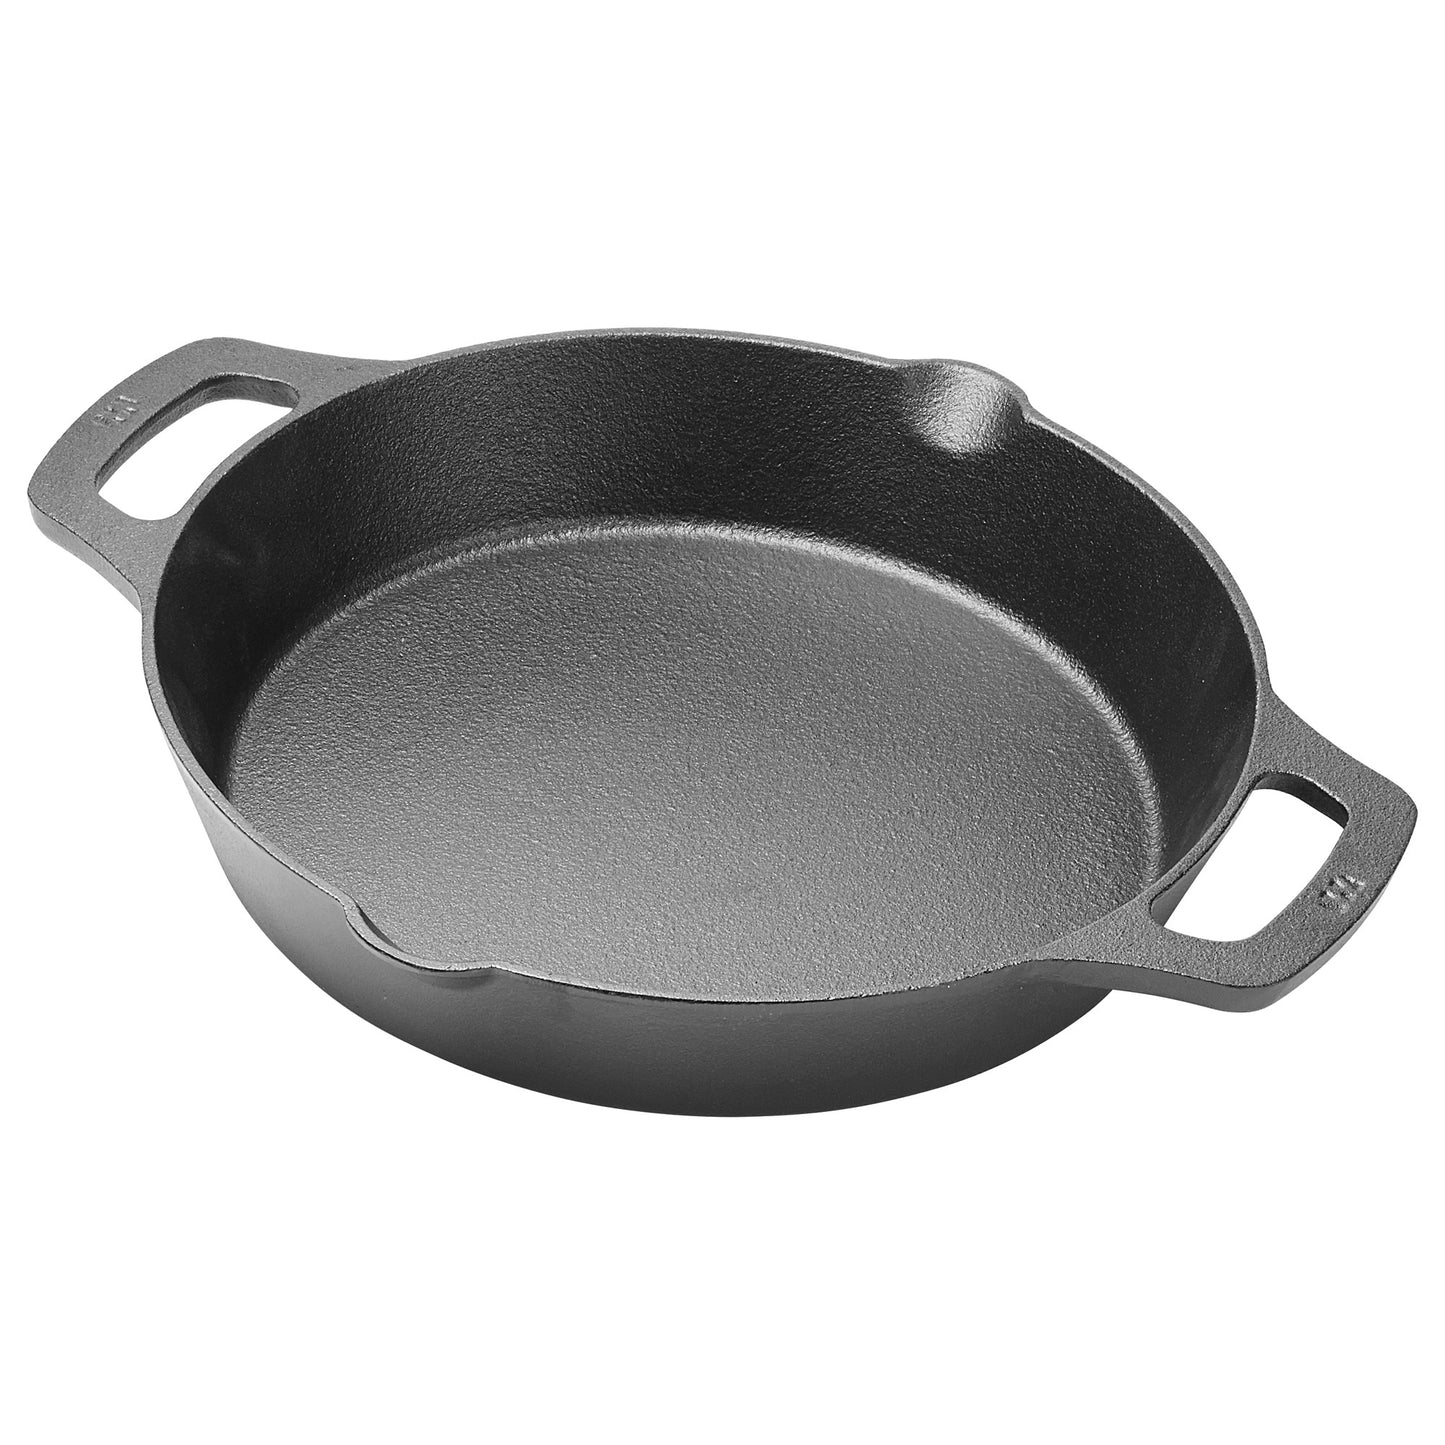 10" FireIron Cast Iron Skillet with Dual Handles